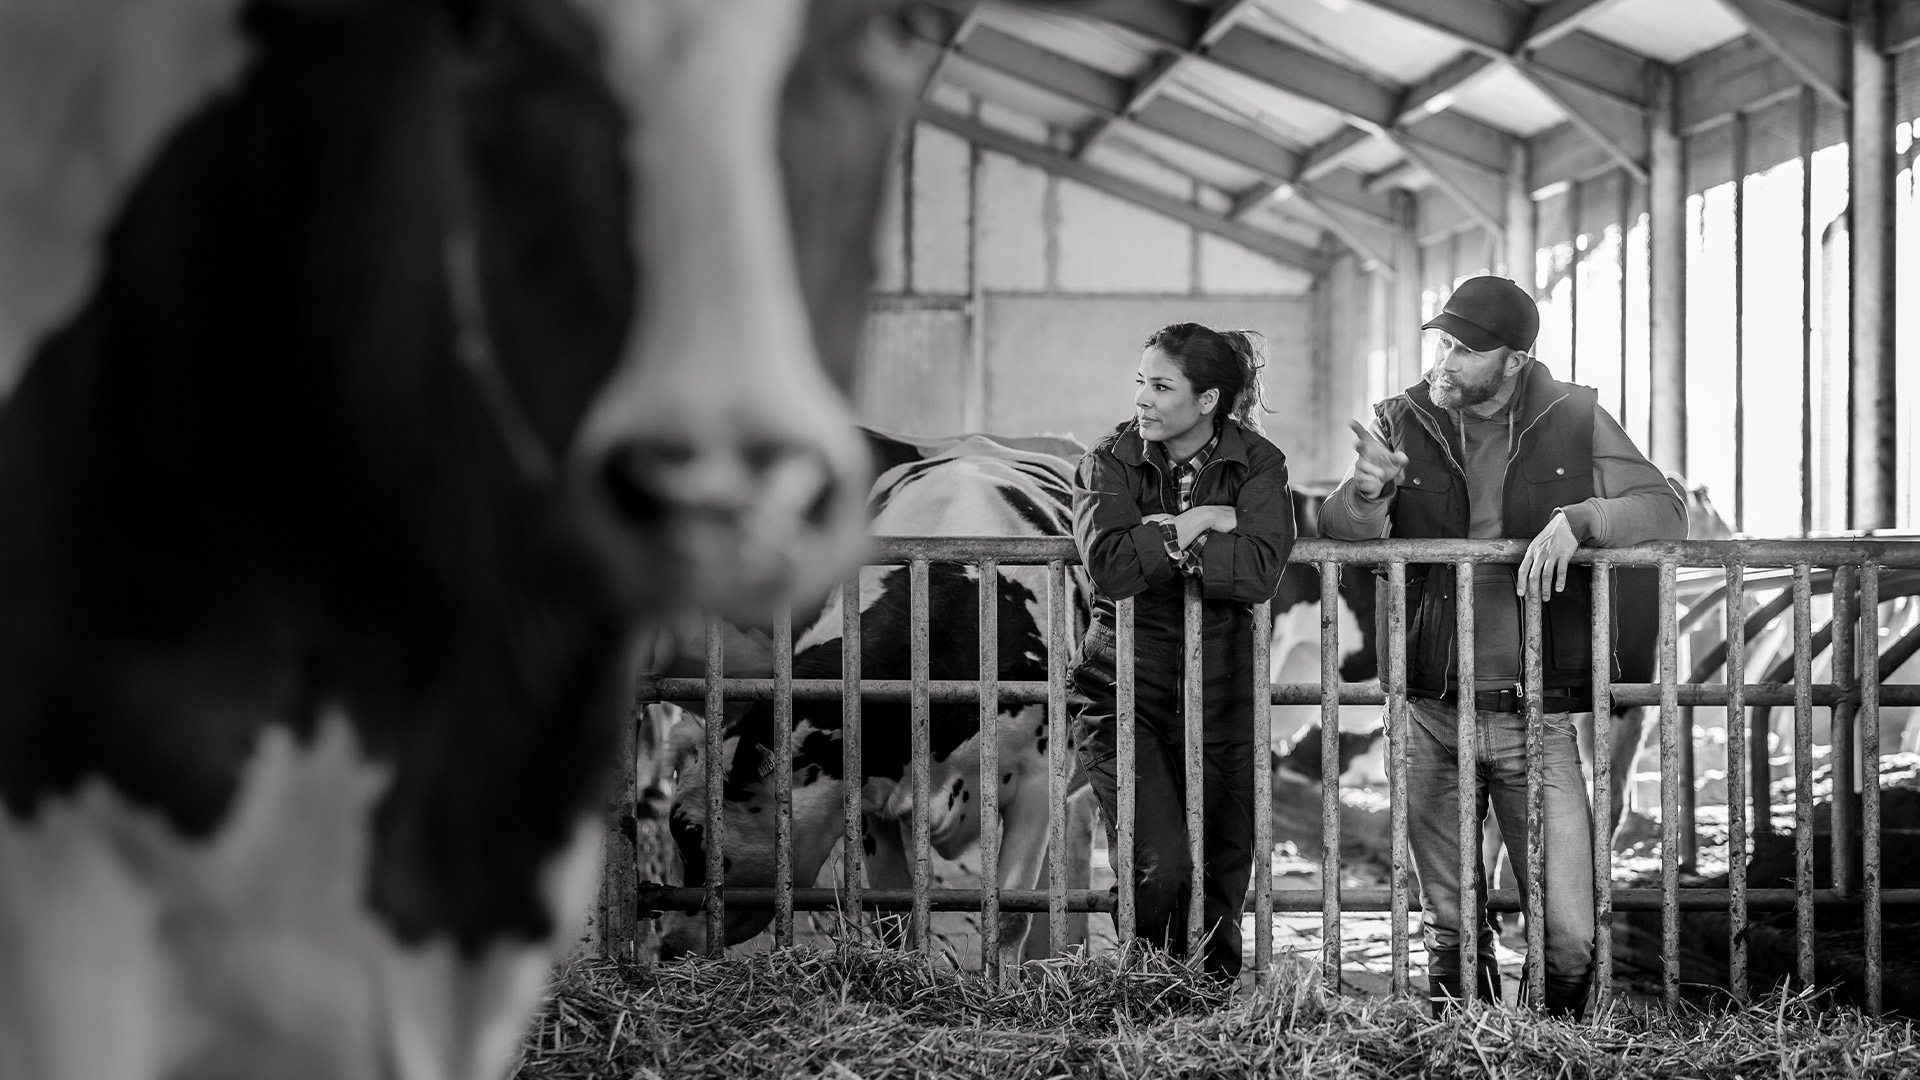 One female farmer and one vet looking at cattle in the barn, milk cow in the front